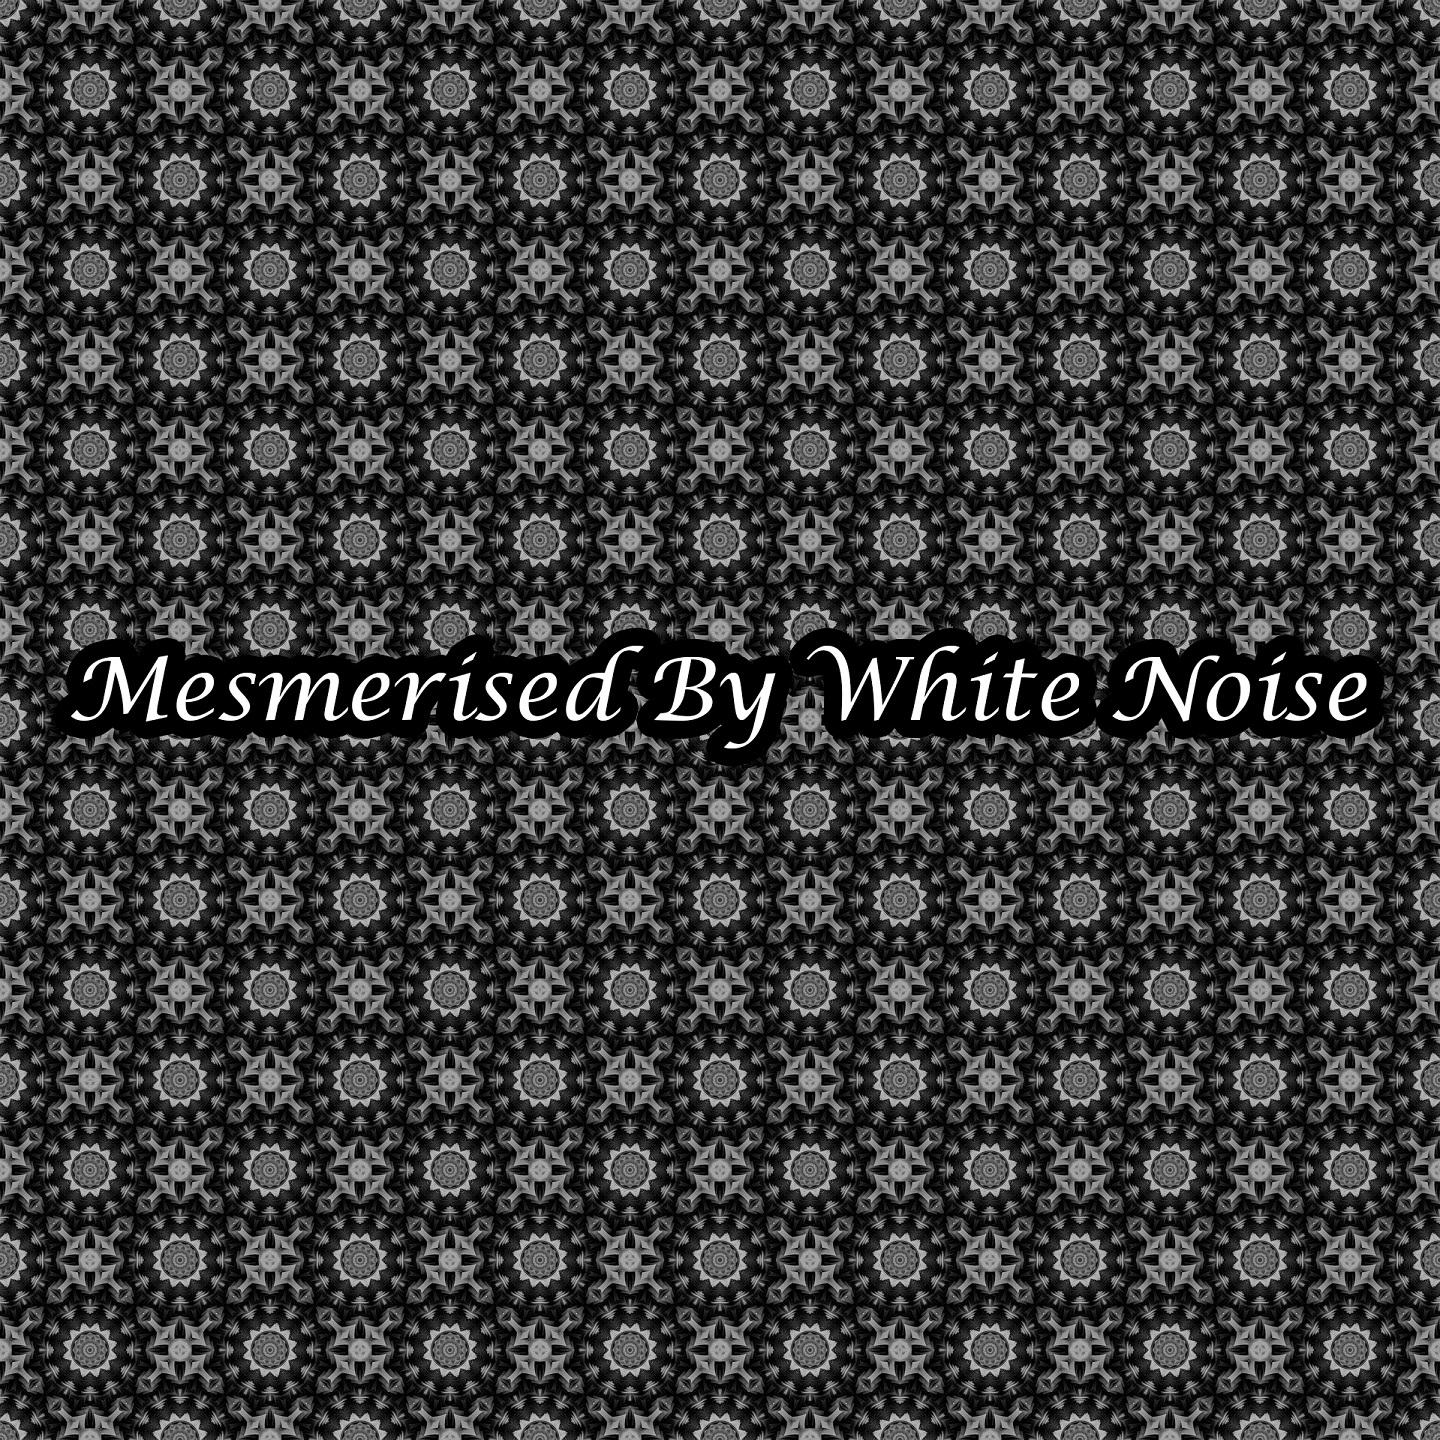 Mesmerised By White Noise